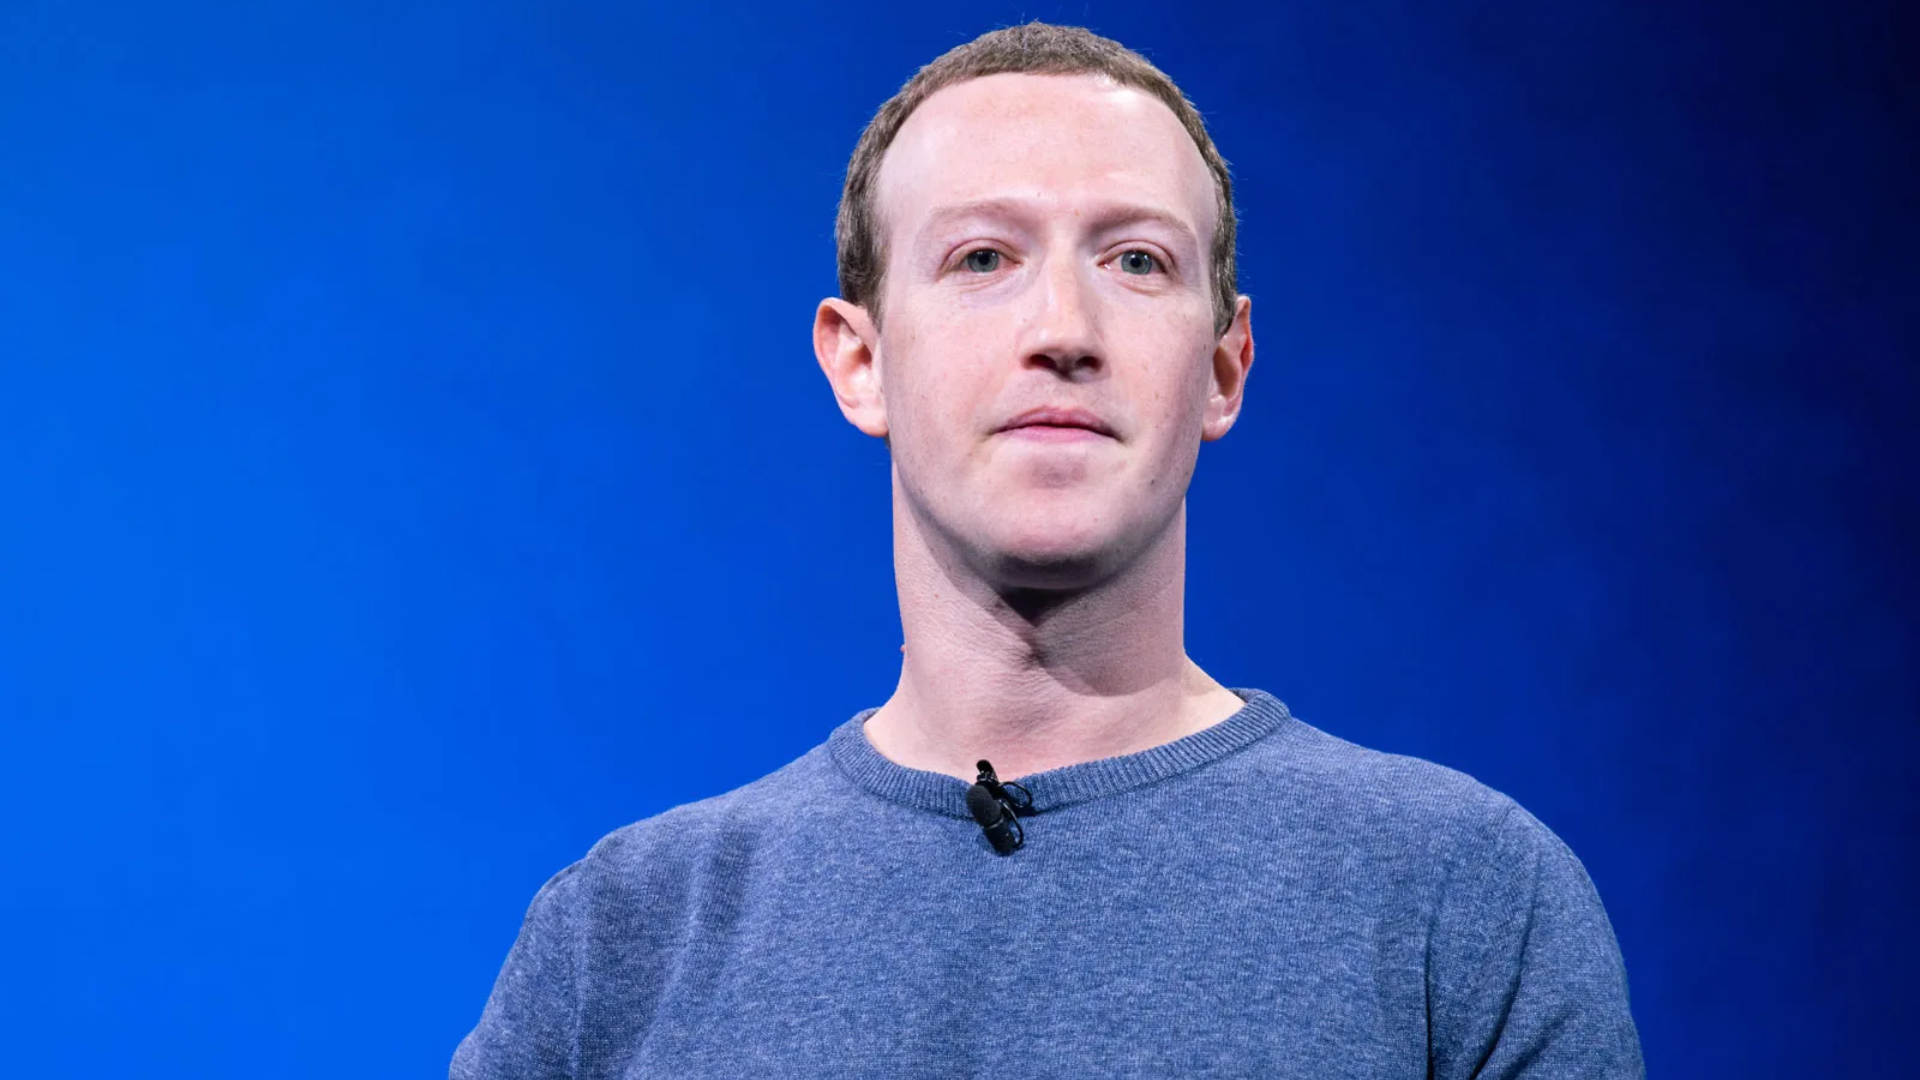 Was Facebook Snooping On Snapchat, YouTube, And Amazon Users? New Court Documents Reveal Mark Zuckerberg’s Secret ‘Project Ghostbusters’